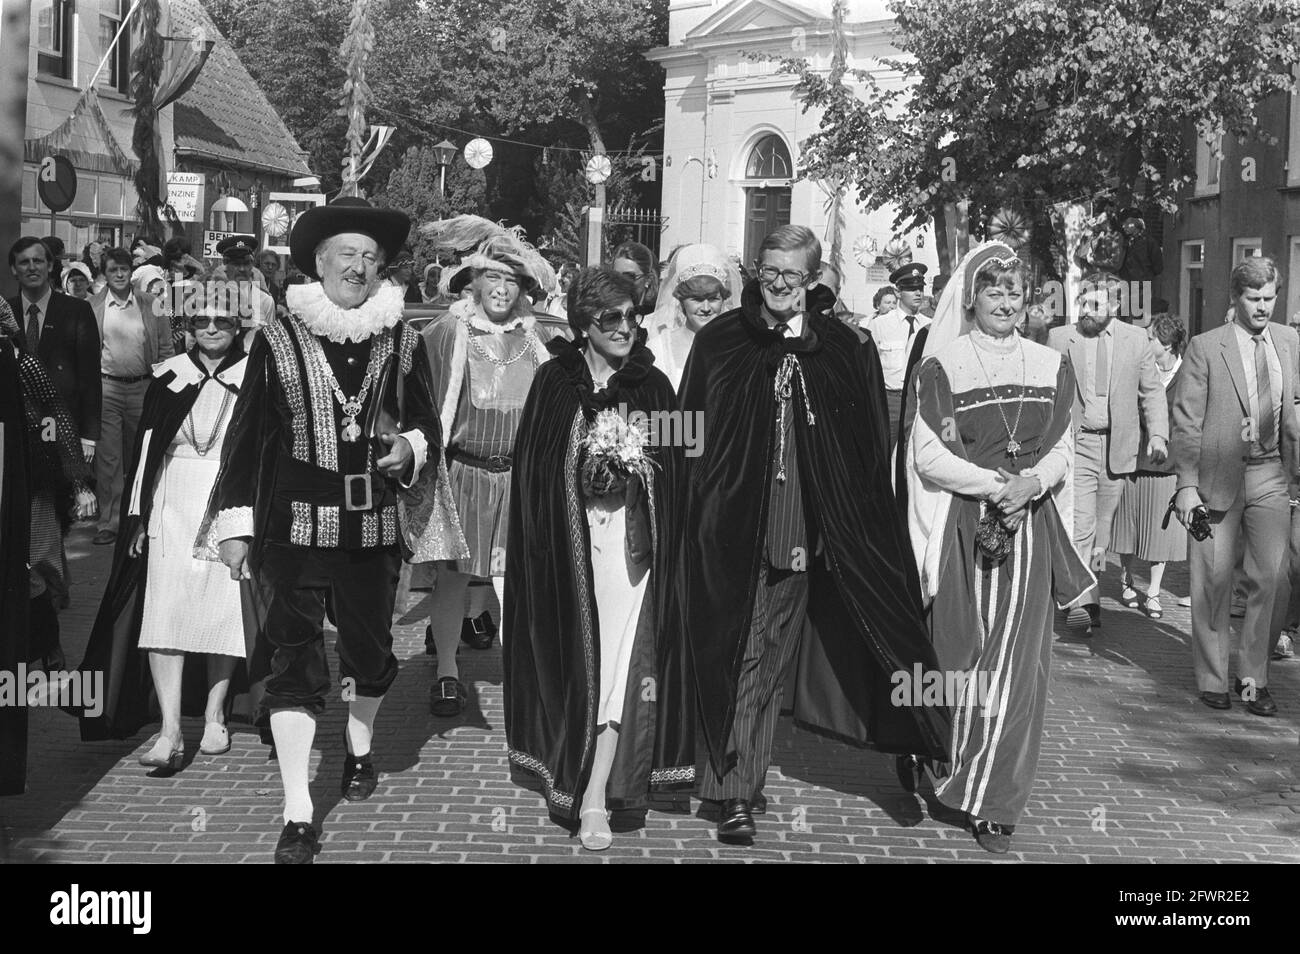 Princess Margriet and Mr. Van Vollenhoven, both wearing medieval capes, walk through the village of Ooltgensplaat during the celebration of the 500th anniversary of St. Adolphus, September 5, 1981, municipalities, anniversaries, parades, princesses, The Netherlands, 20th century press agency photo, news to remember, documentary, historic photography 1945-1990, visual stories, human history of the Twentieth Century, capturing moments in time Stock Photo